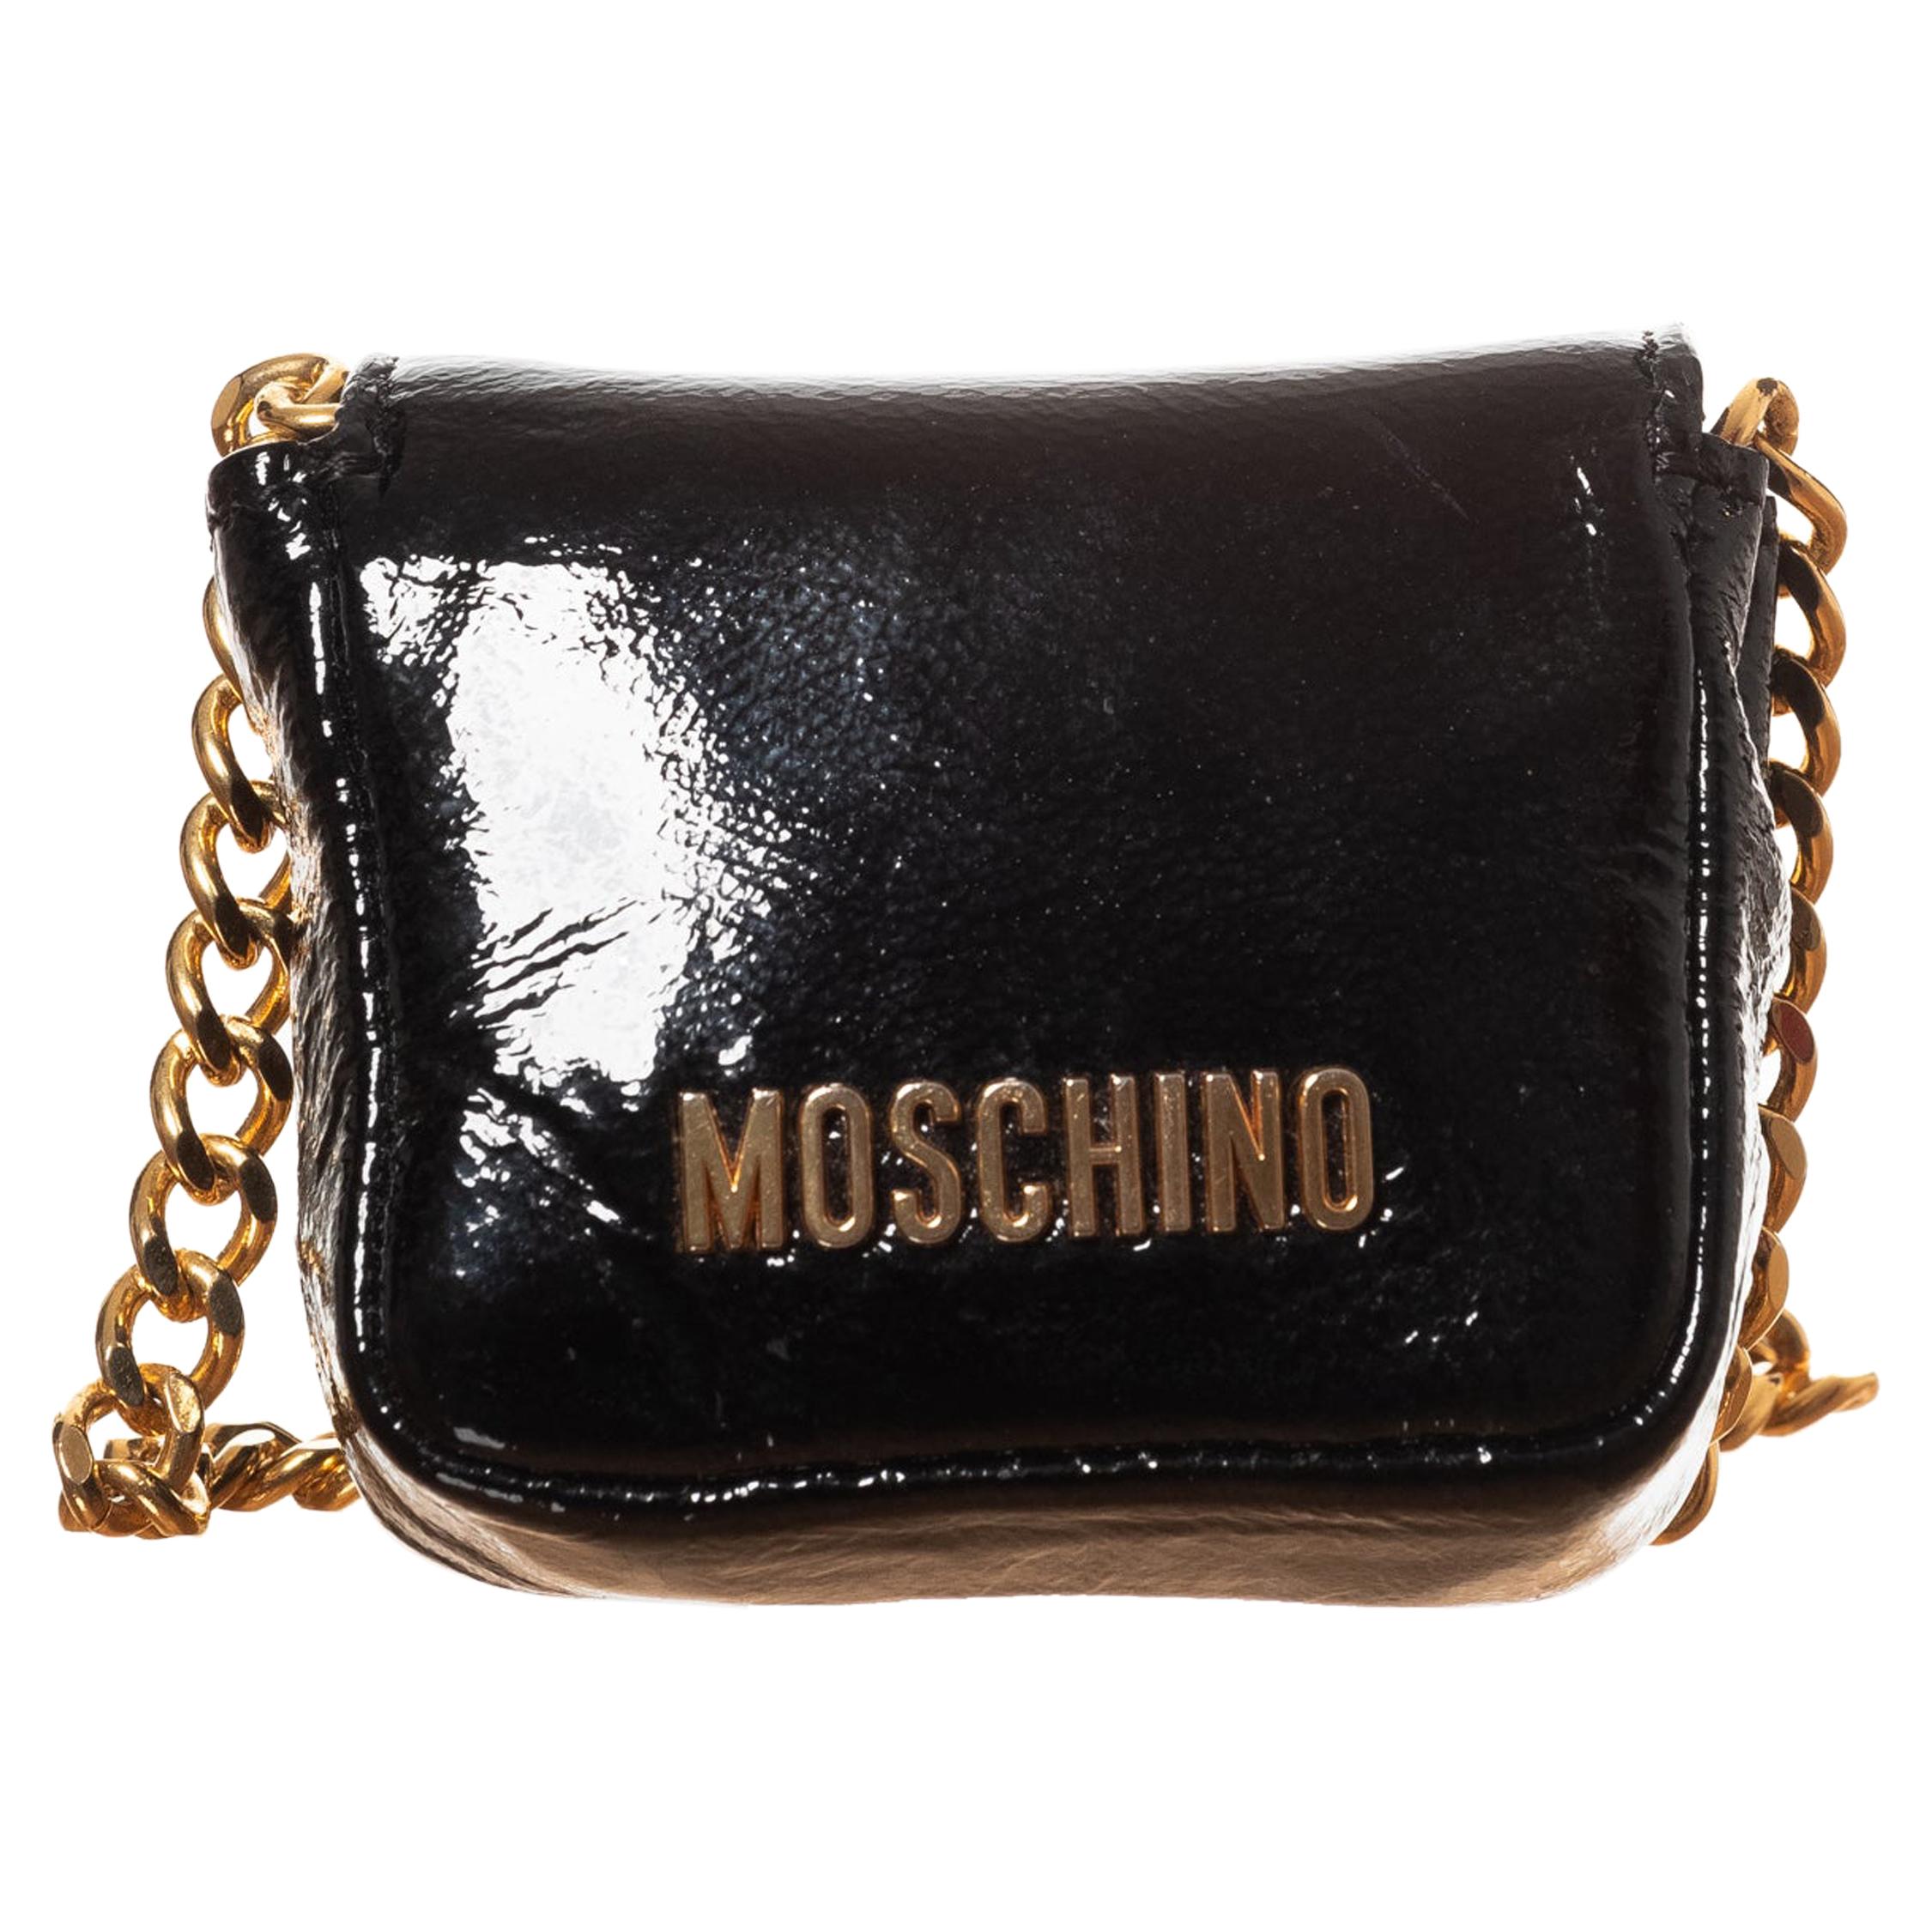 Moschino Patent Leather Navy Bandouliere Bag